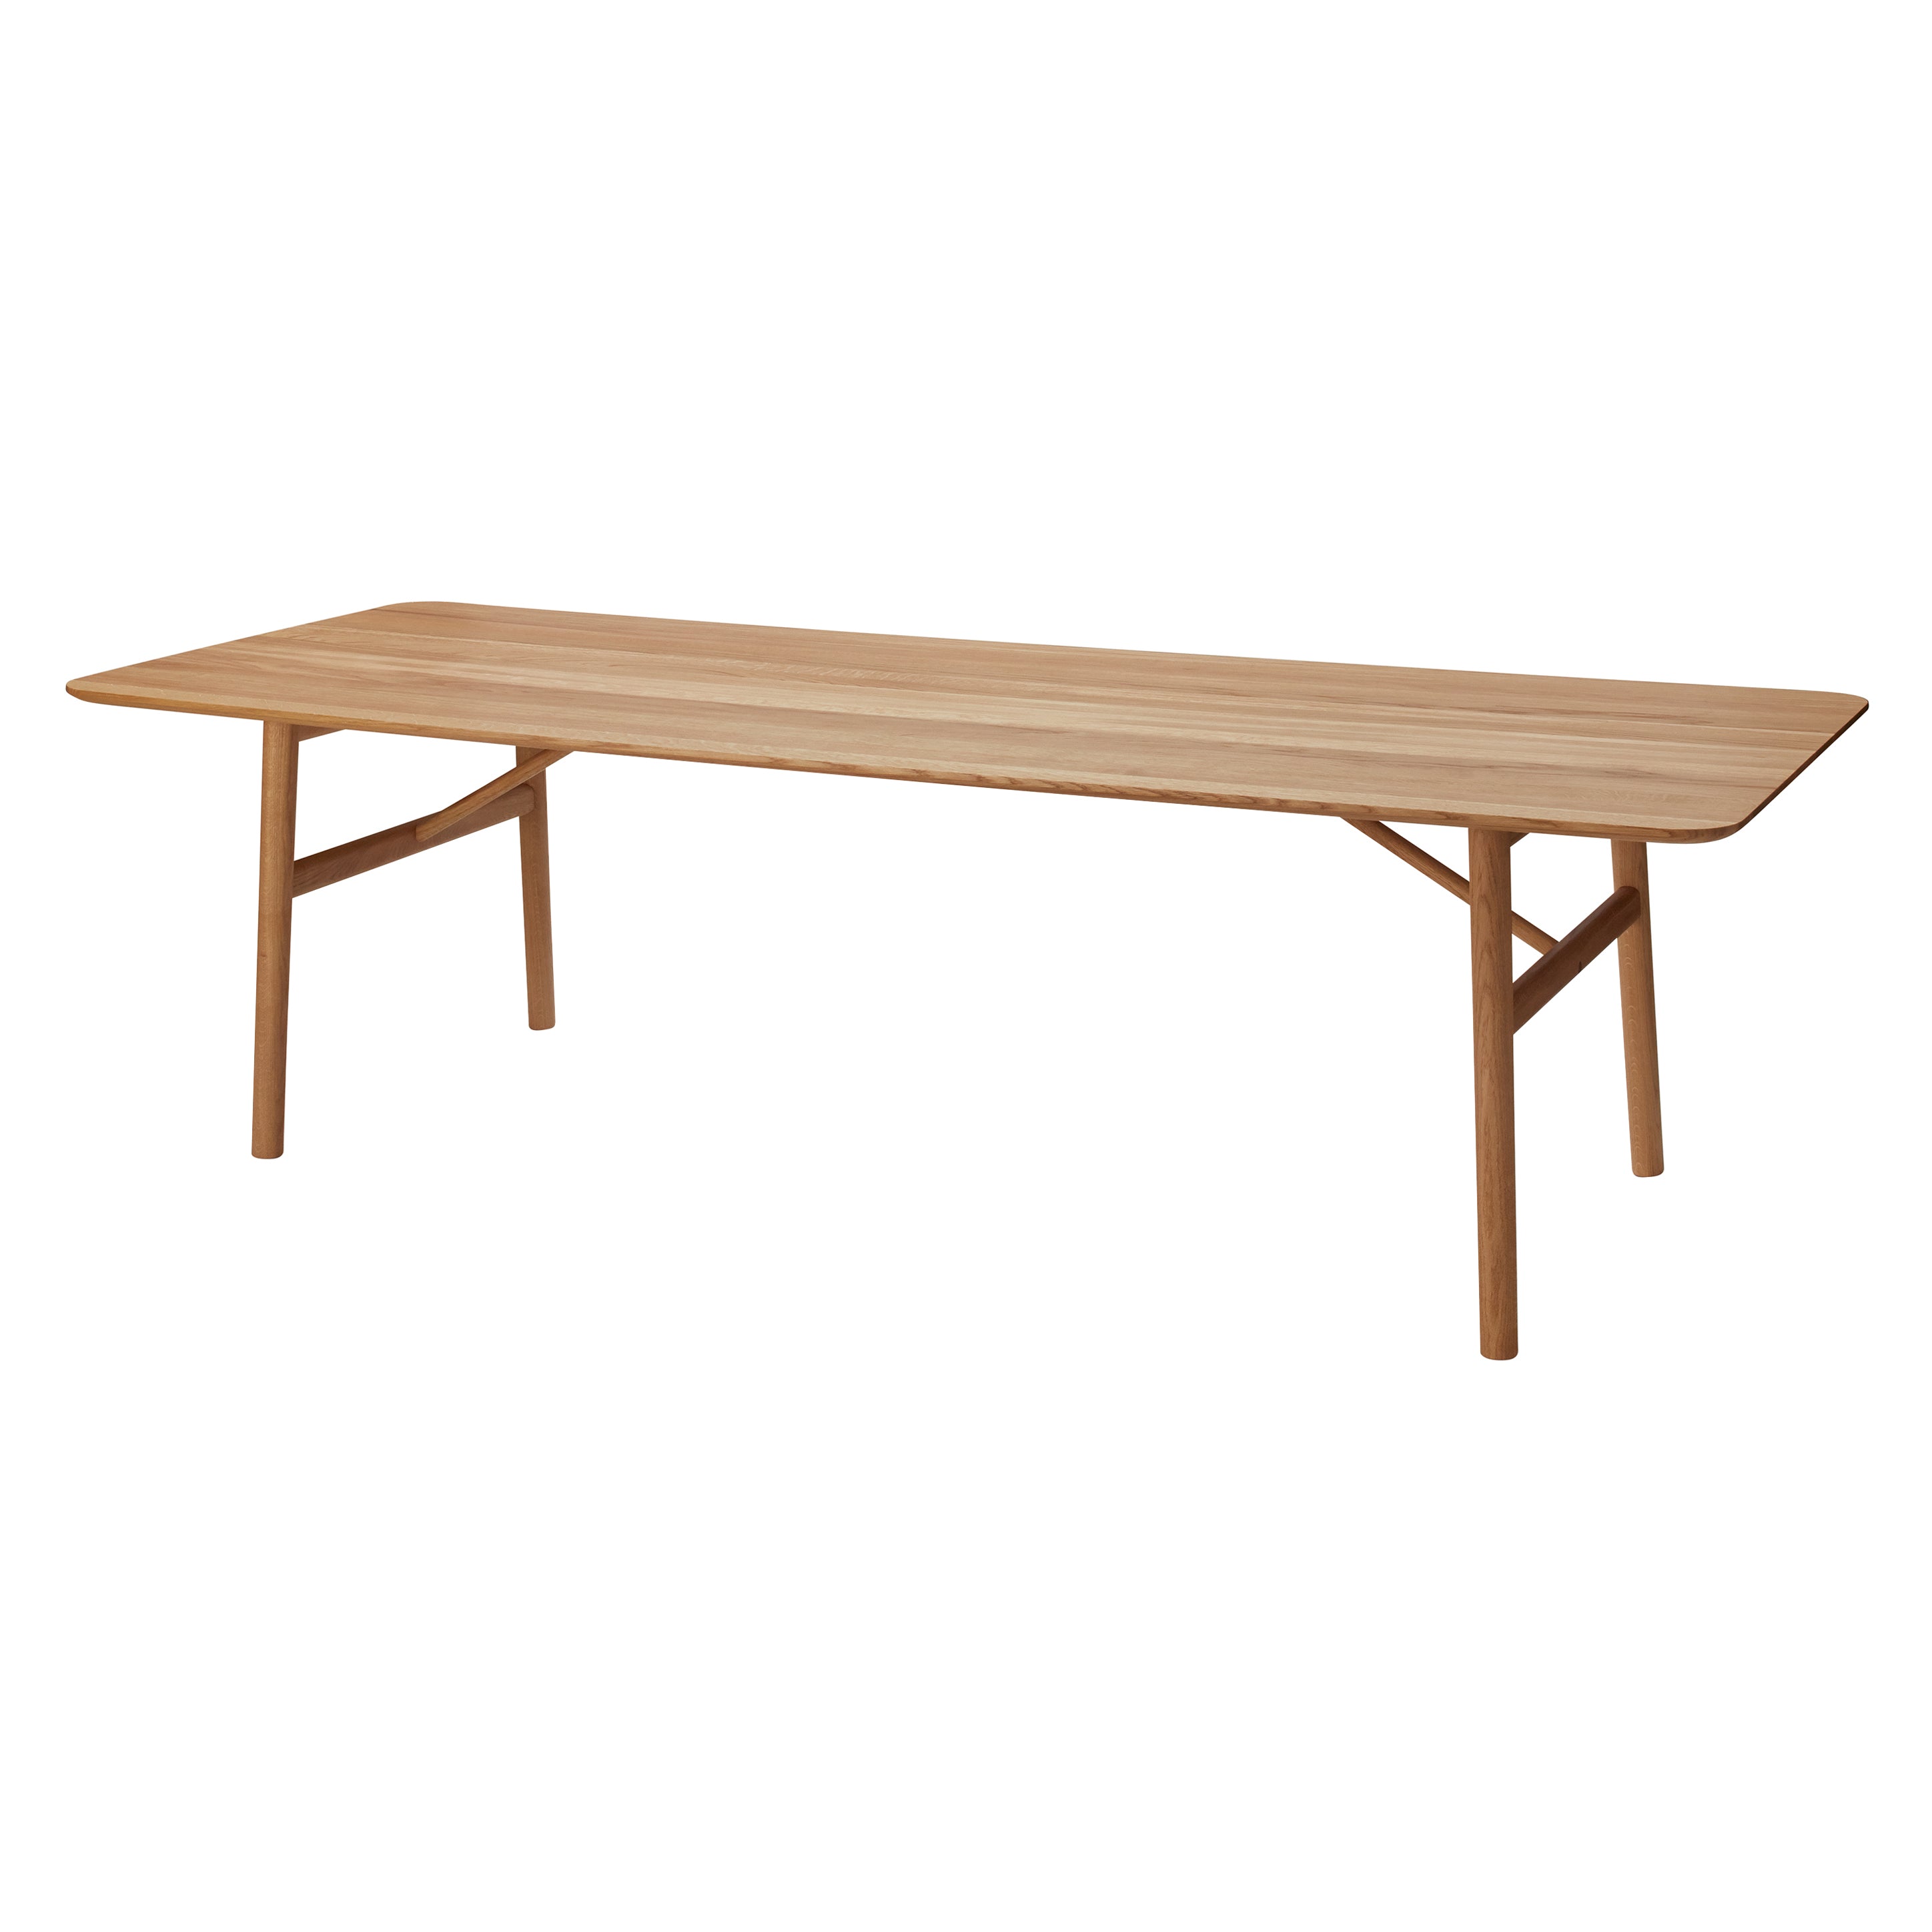 Hven Table: Large - 102.4